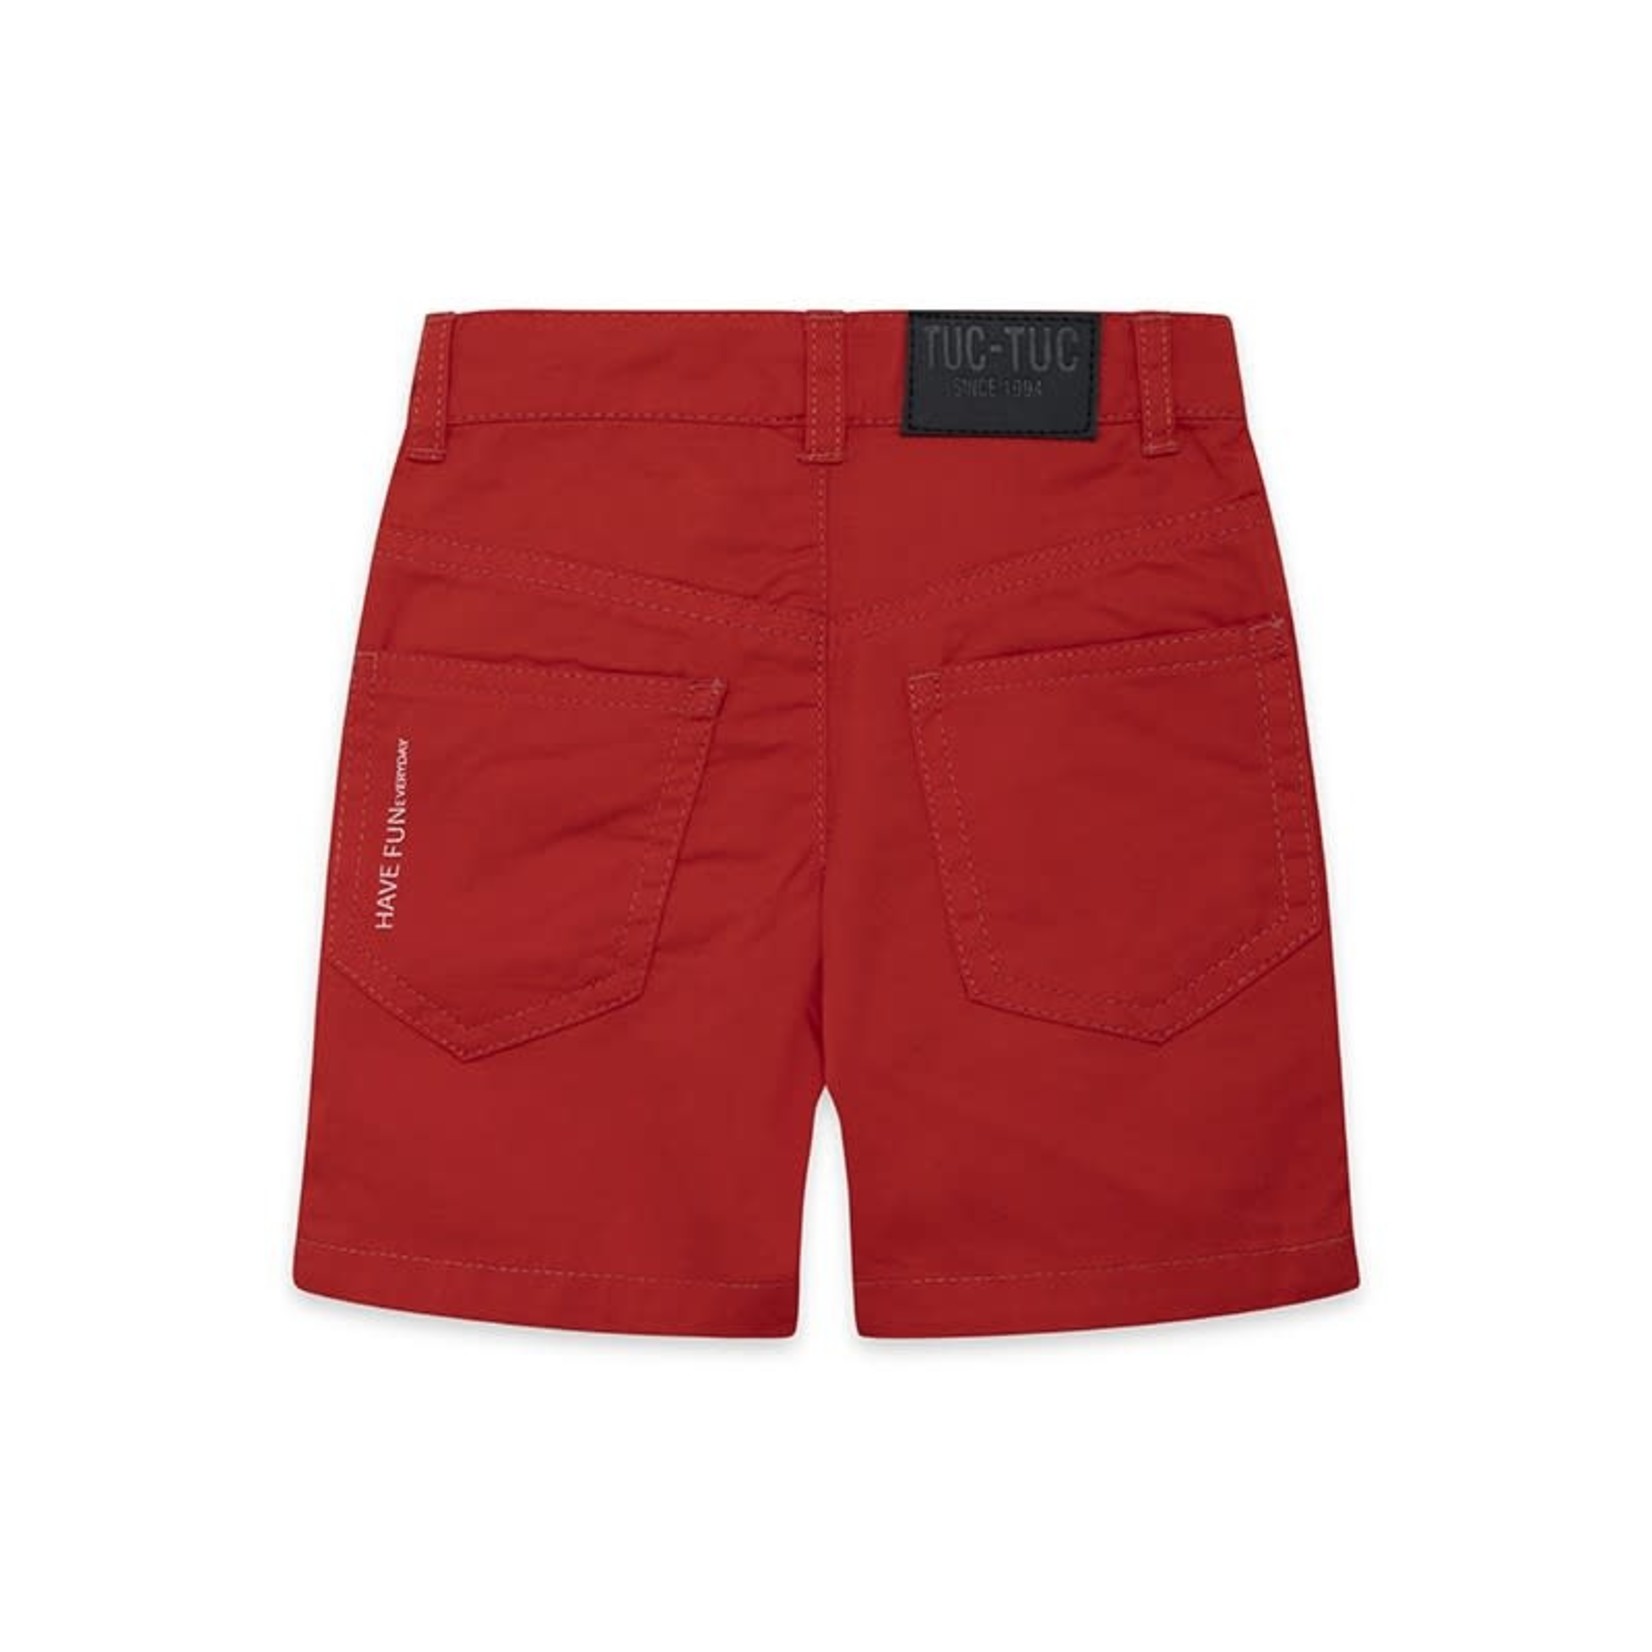 TucTuc TUC TUC - Red Twill Bermuda Shorts with Pockets 'Basicos'